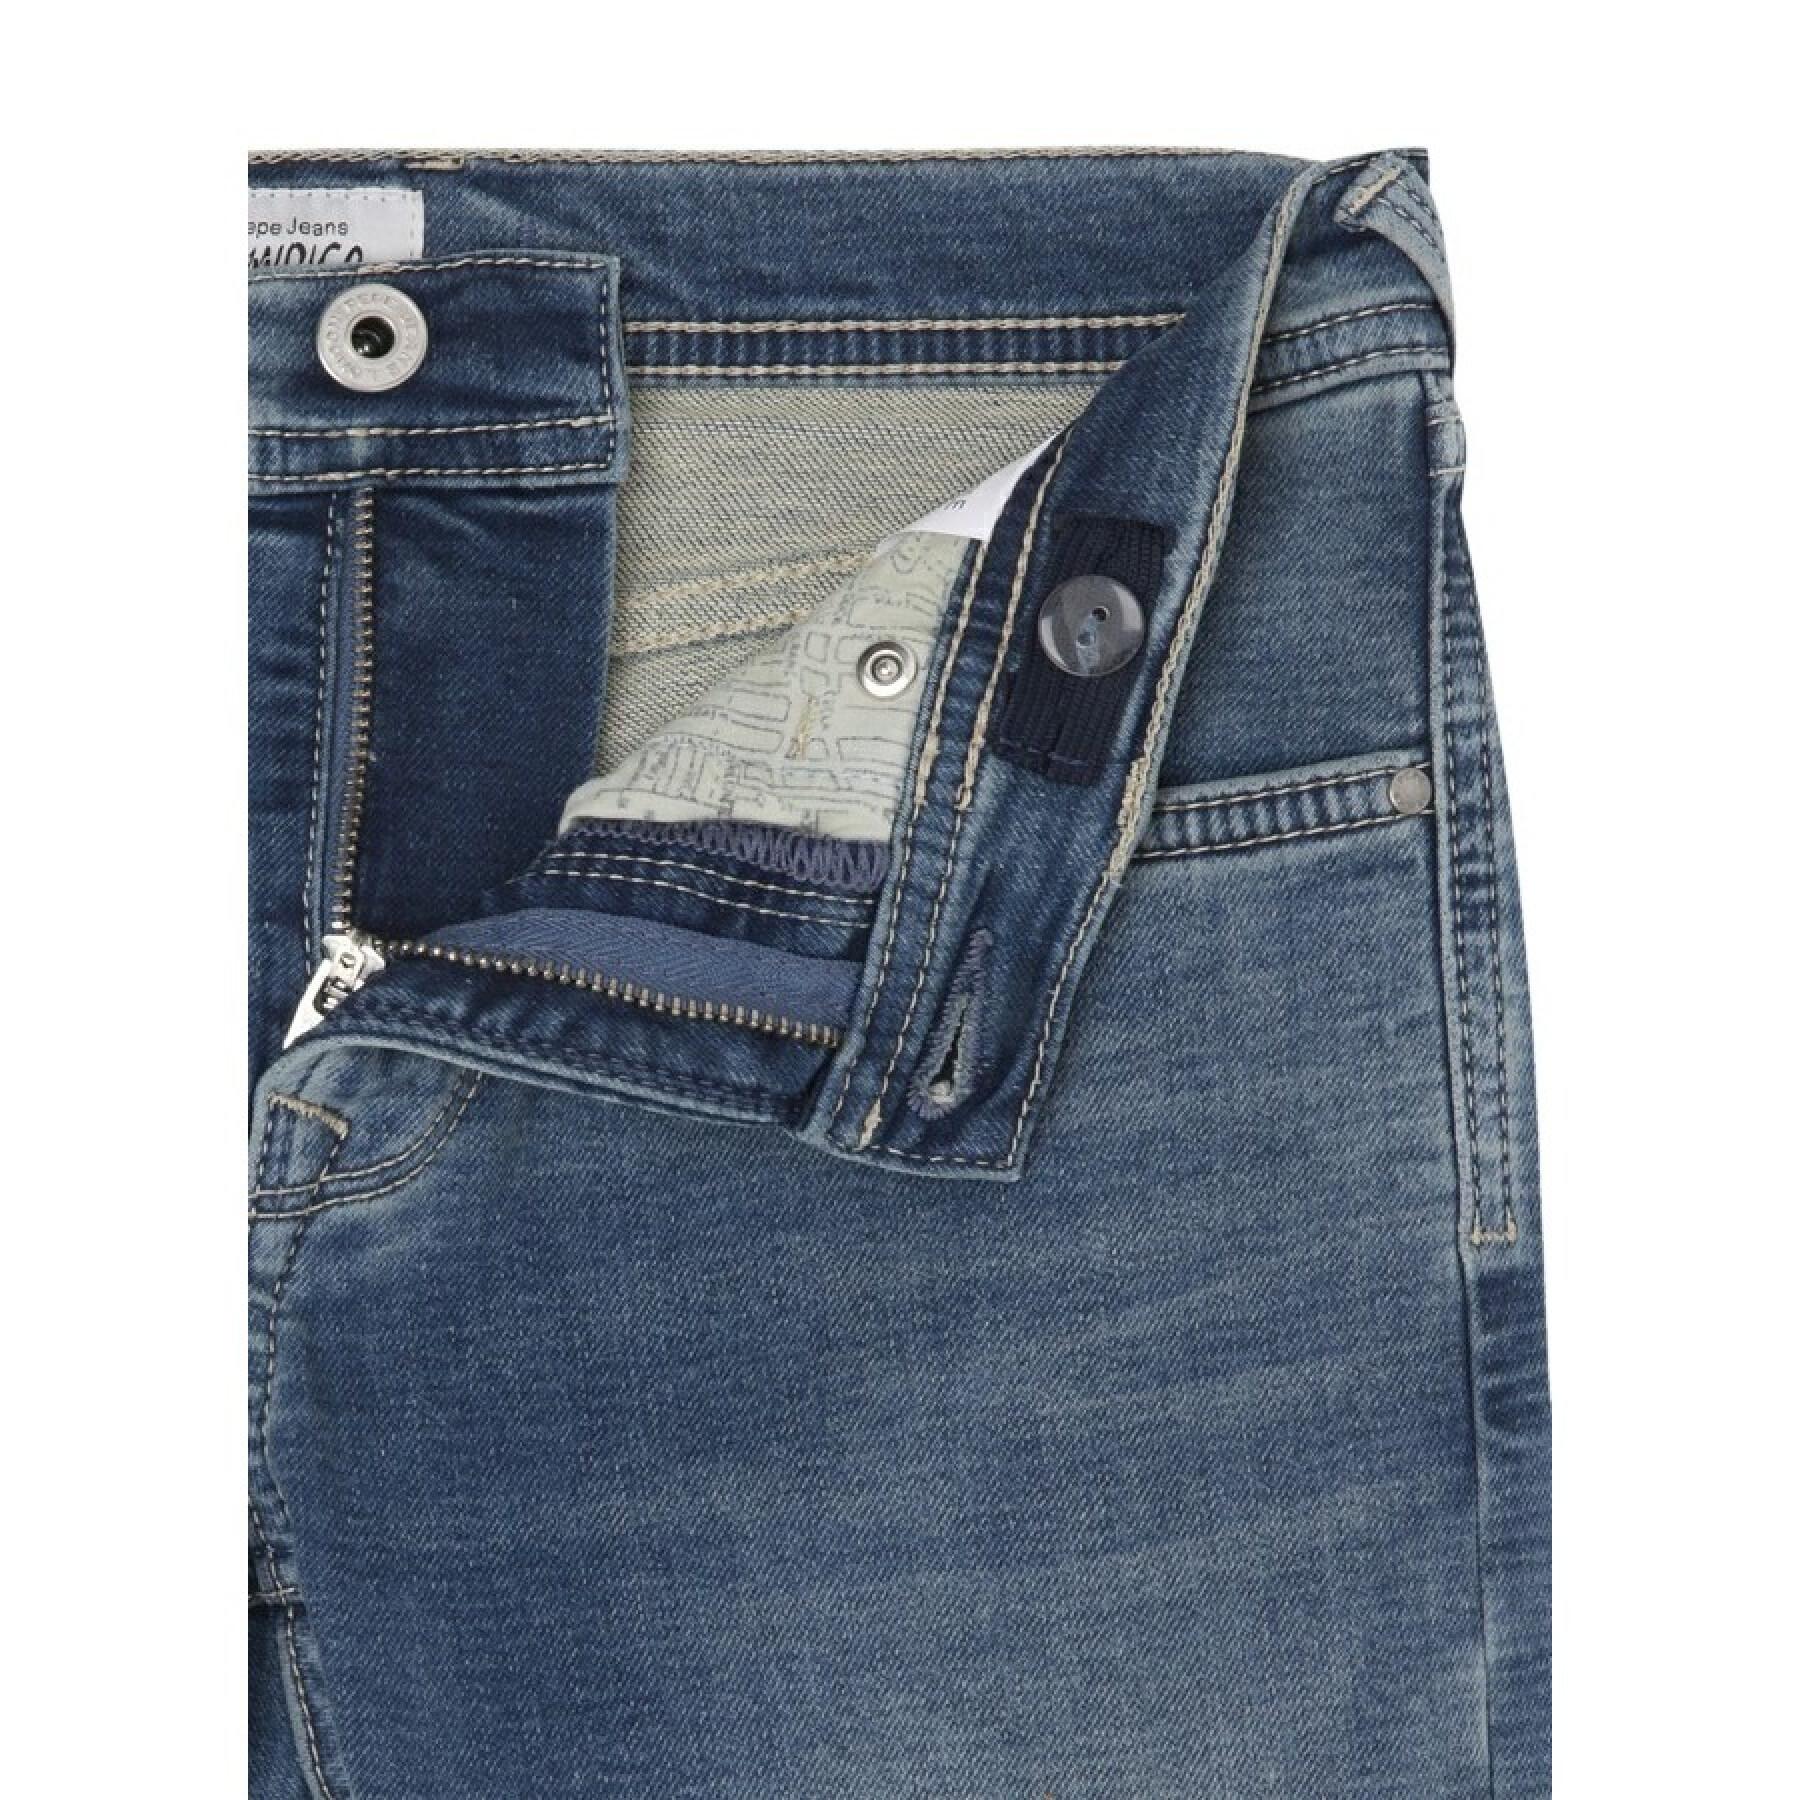 Jeans per bambini Pepe Jeans Finly